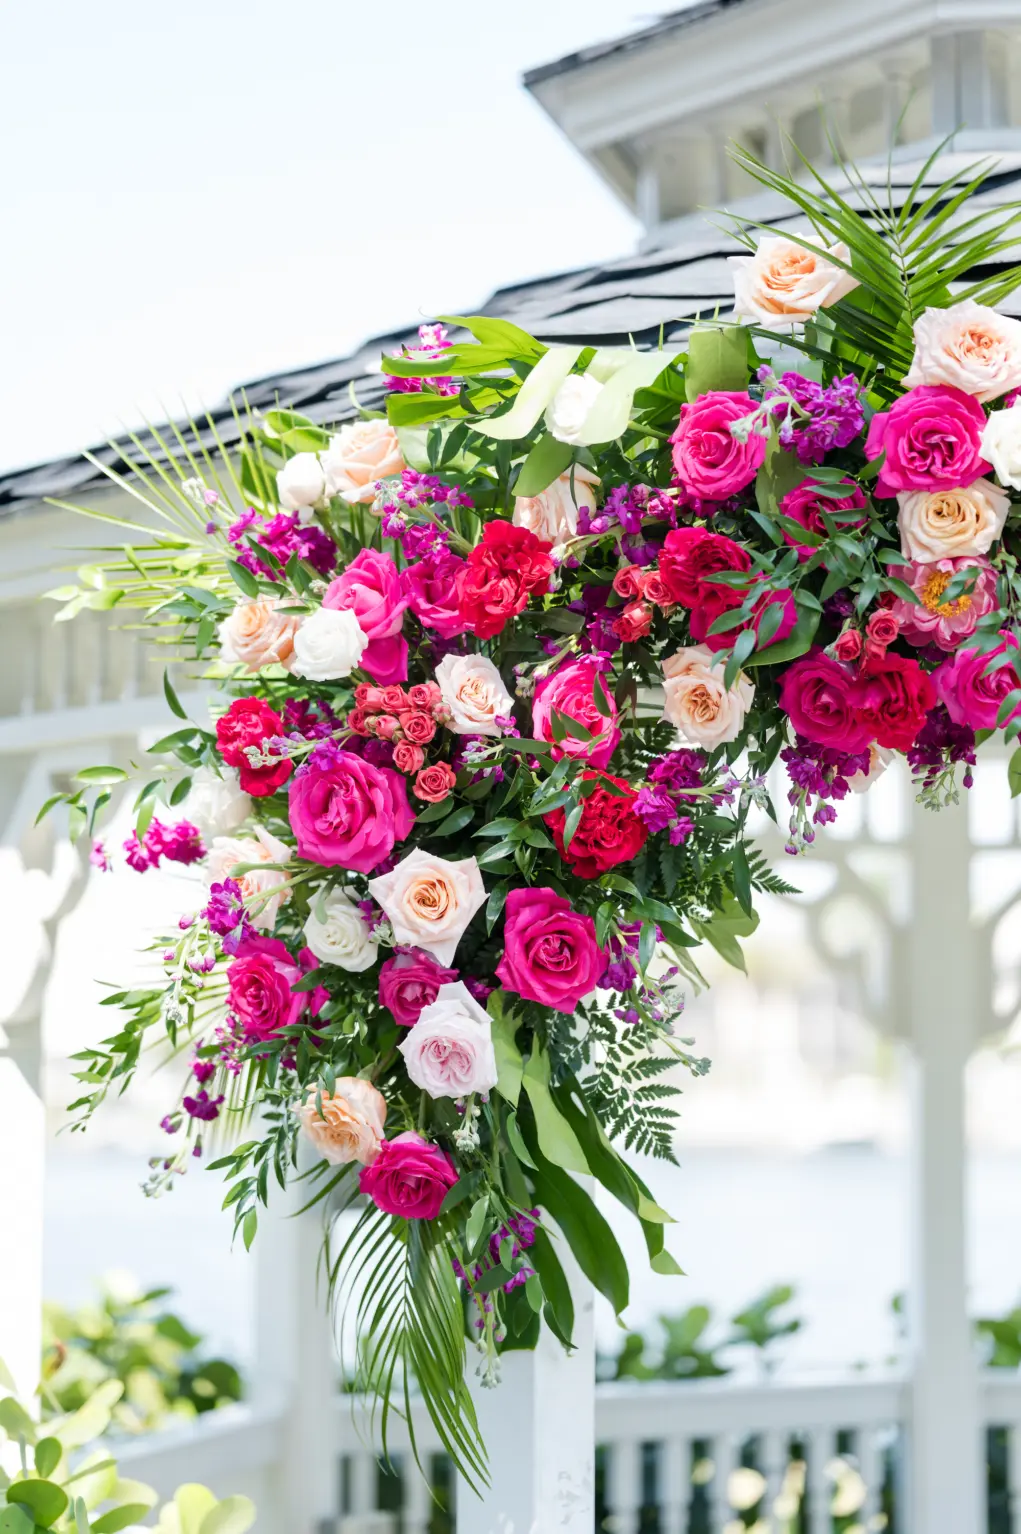 Tropical Floral Ideas for Wedding Ceremony Gazebo Arch | Red, Pink, Orange, and White Roses with Greenery